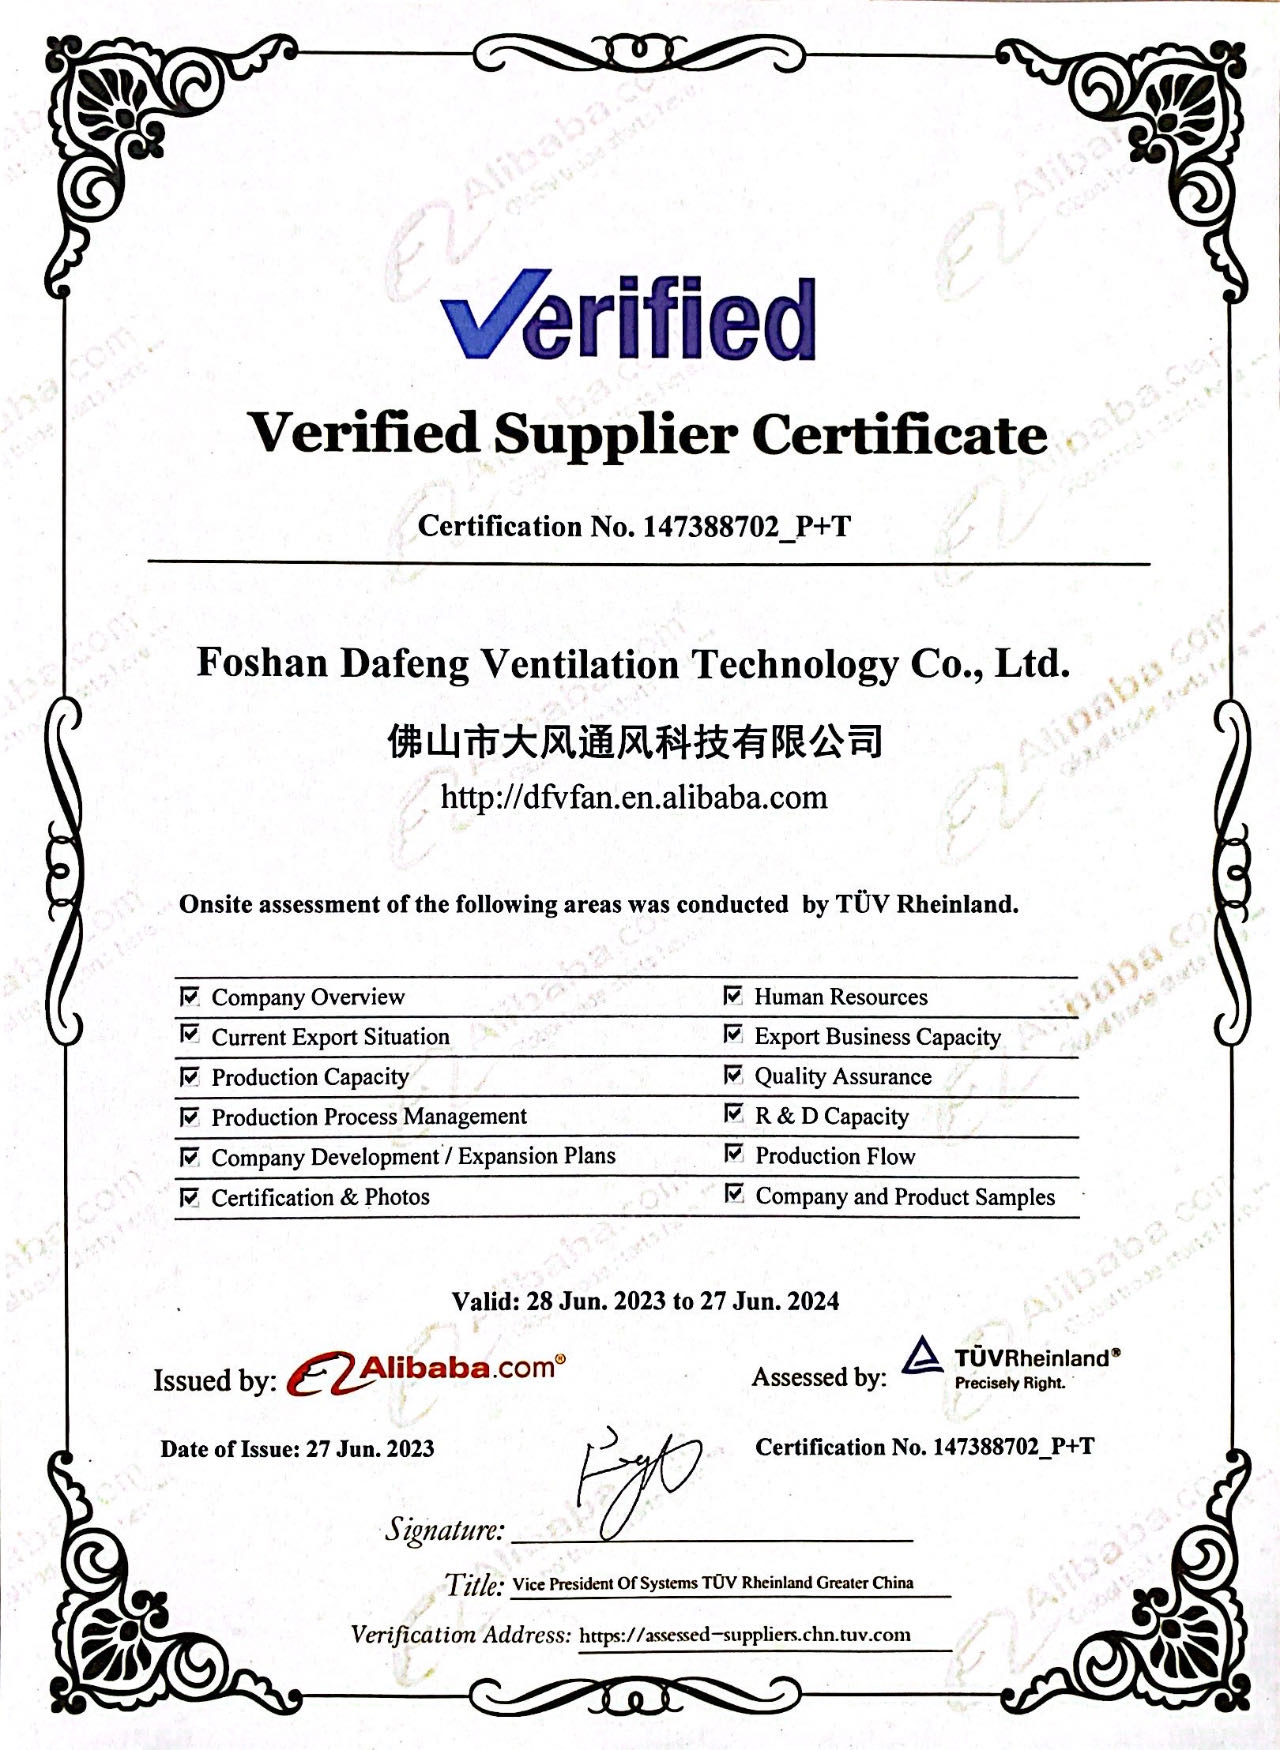 Assessment Report Presented to Foshan Dafeng Ventilation Technology Co., Ltd